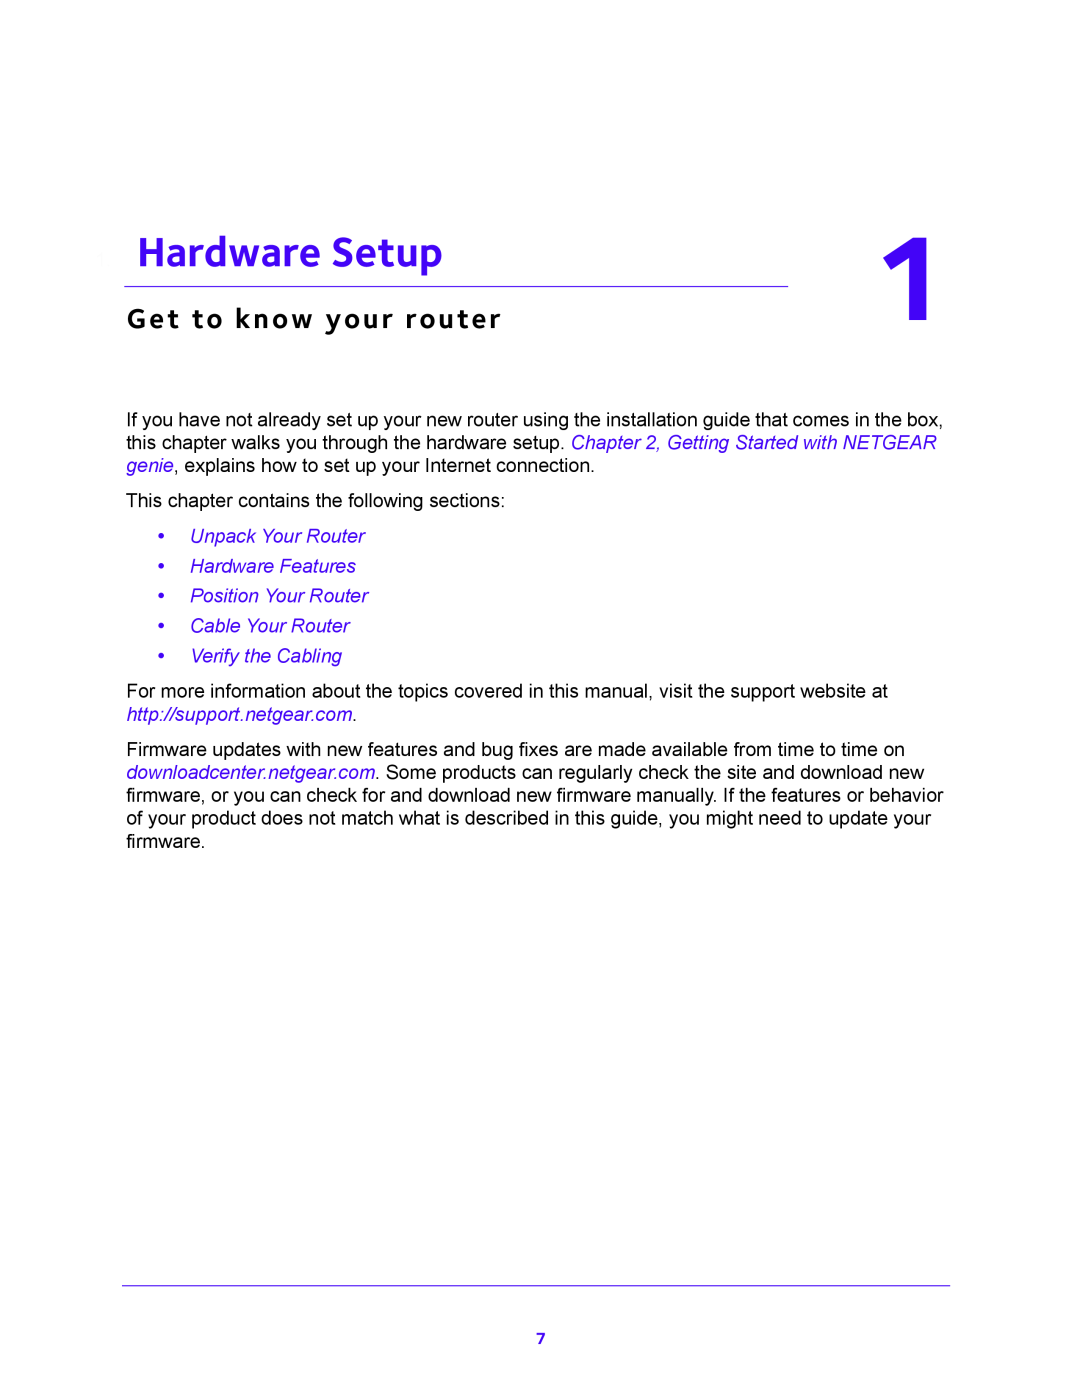 NETGEAR WNR200v4 Hardware Setup, Get to know your router, Unpack Your Router Hardware Features Position Your Router 